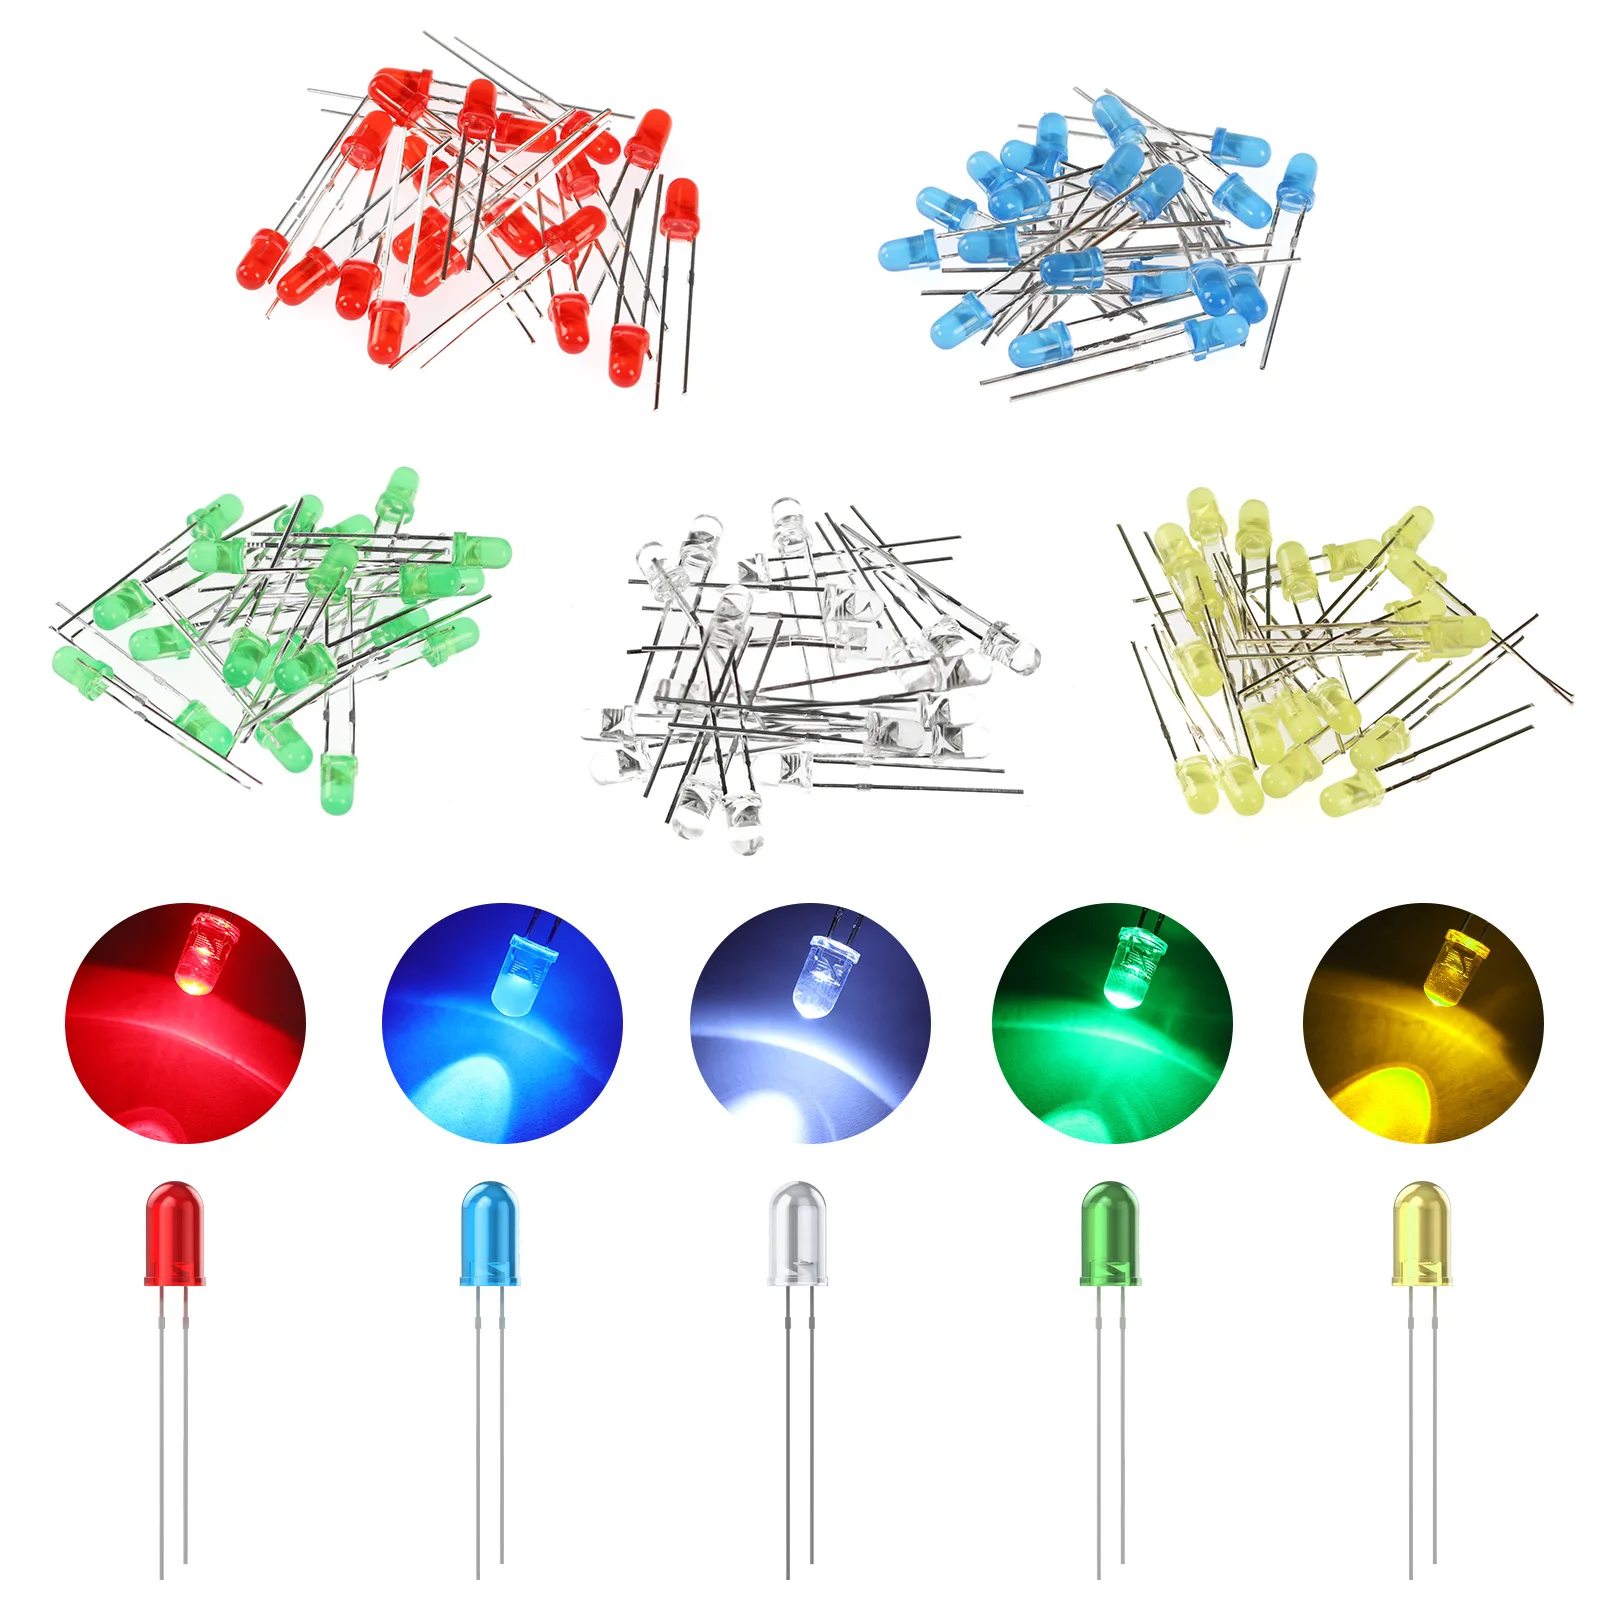 

100PCS LED Diode 3mm Lights Emitting Diodes Assortment Red Green Blue Yellow White Micro Lamp Electronic Project Kit